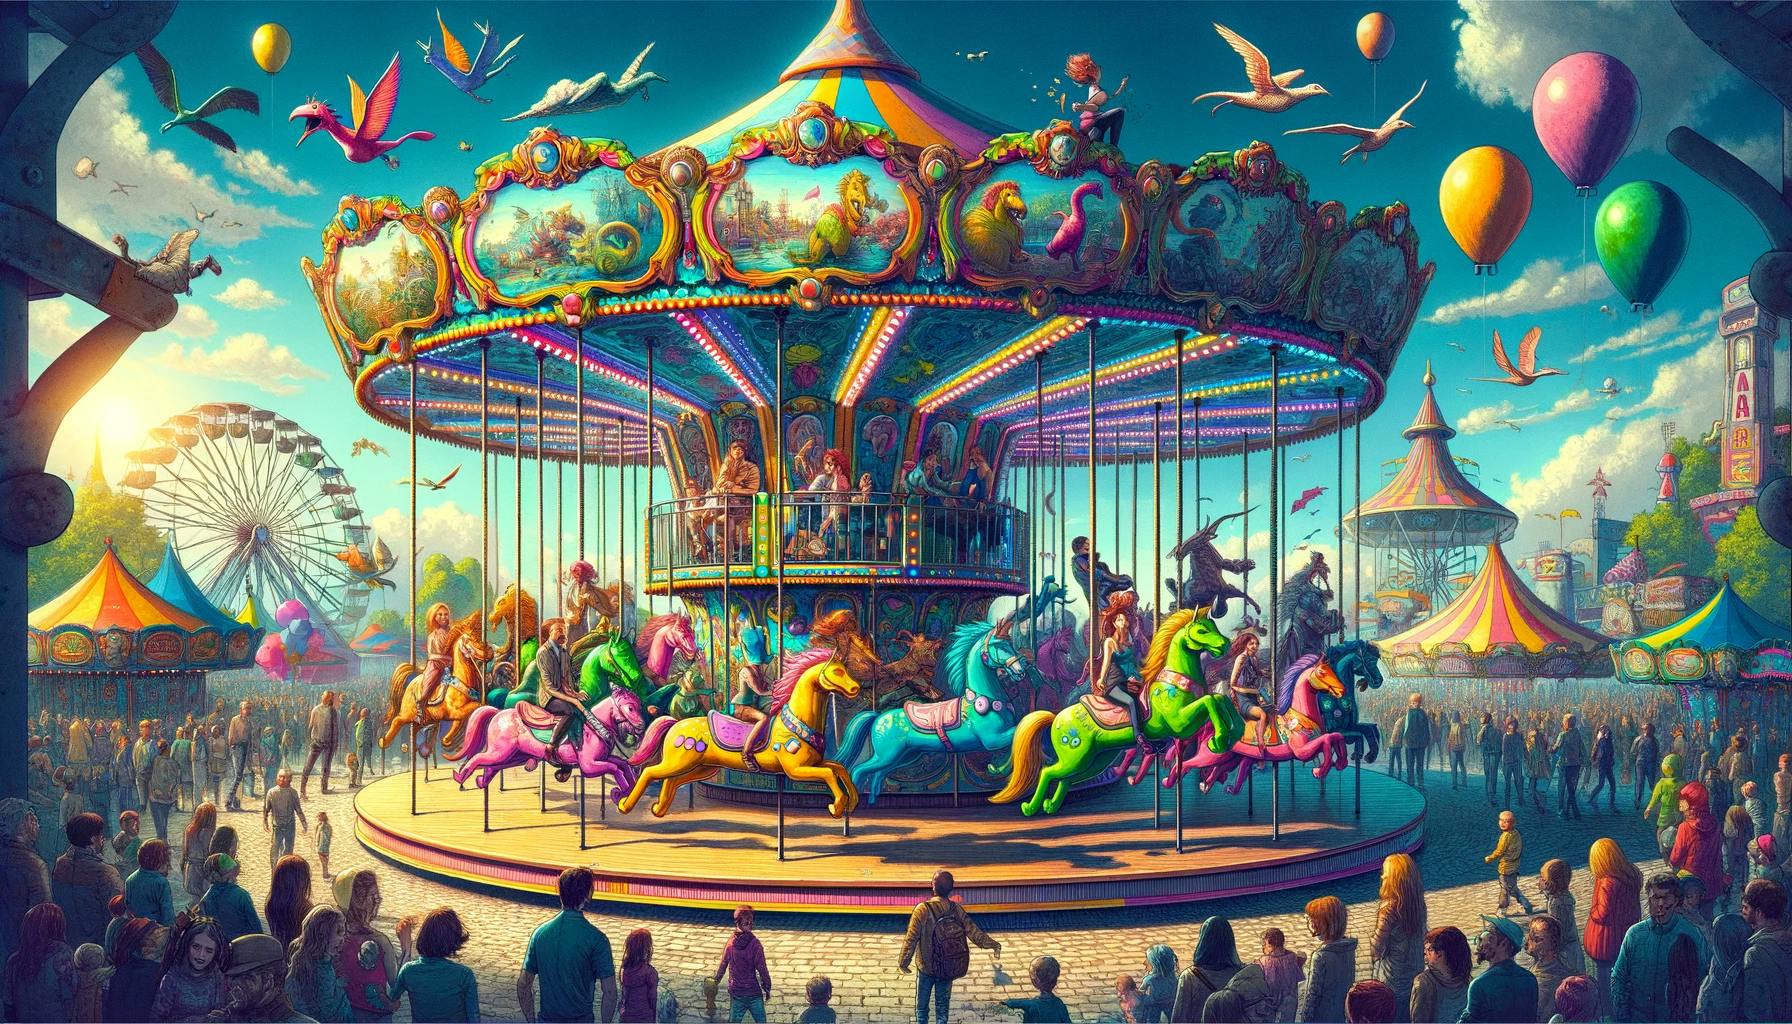 Cover Image for Don't Play Alone: Ride A Carousel With Others